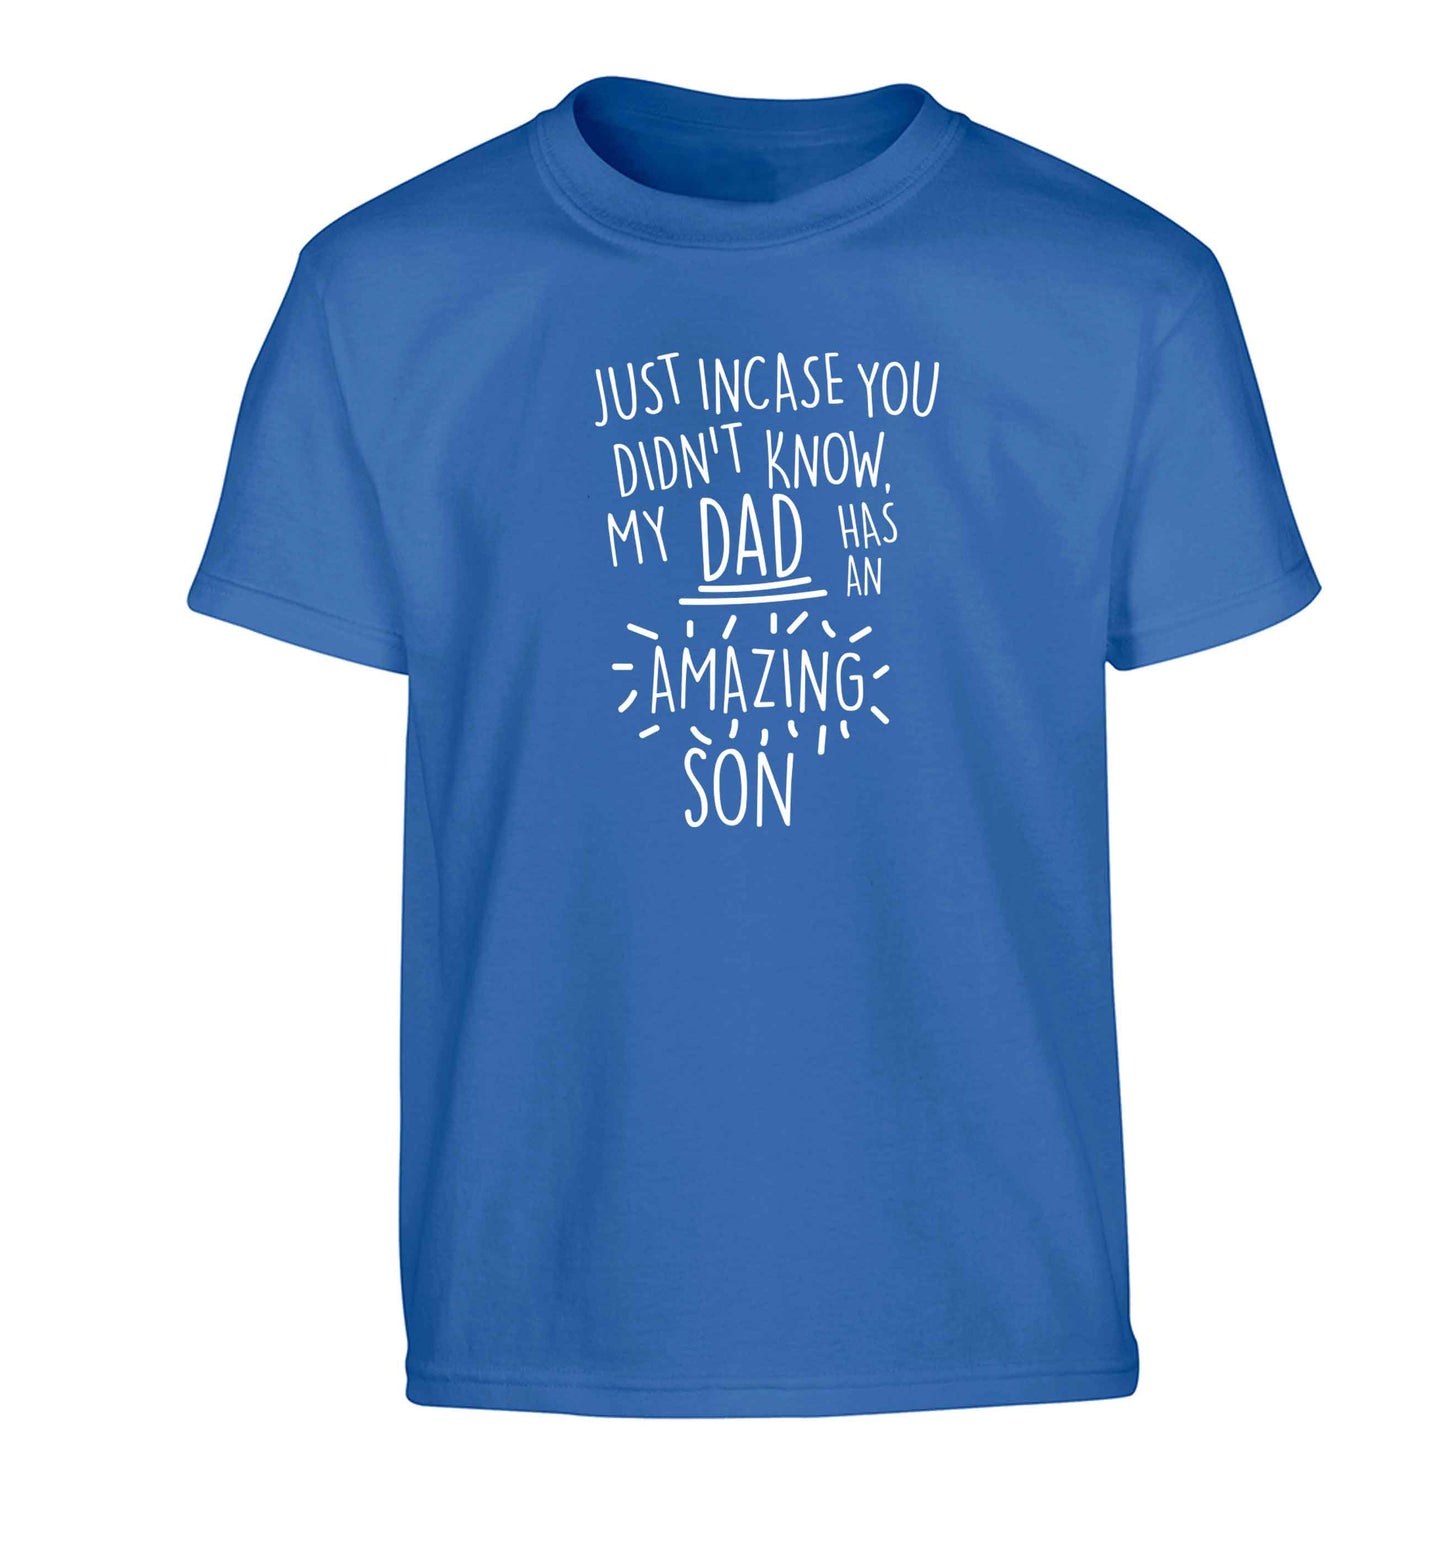 Just incase you didn't know my dad has an amazing son Children's blue Tshirt 12-13 Years